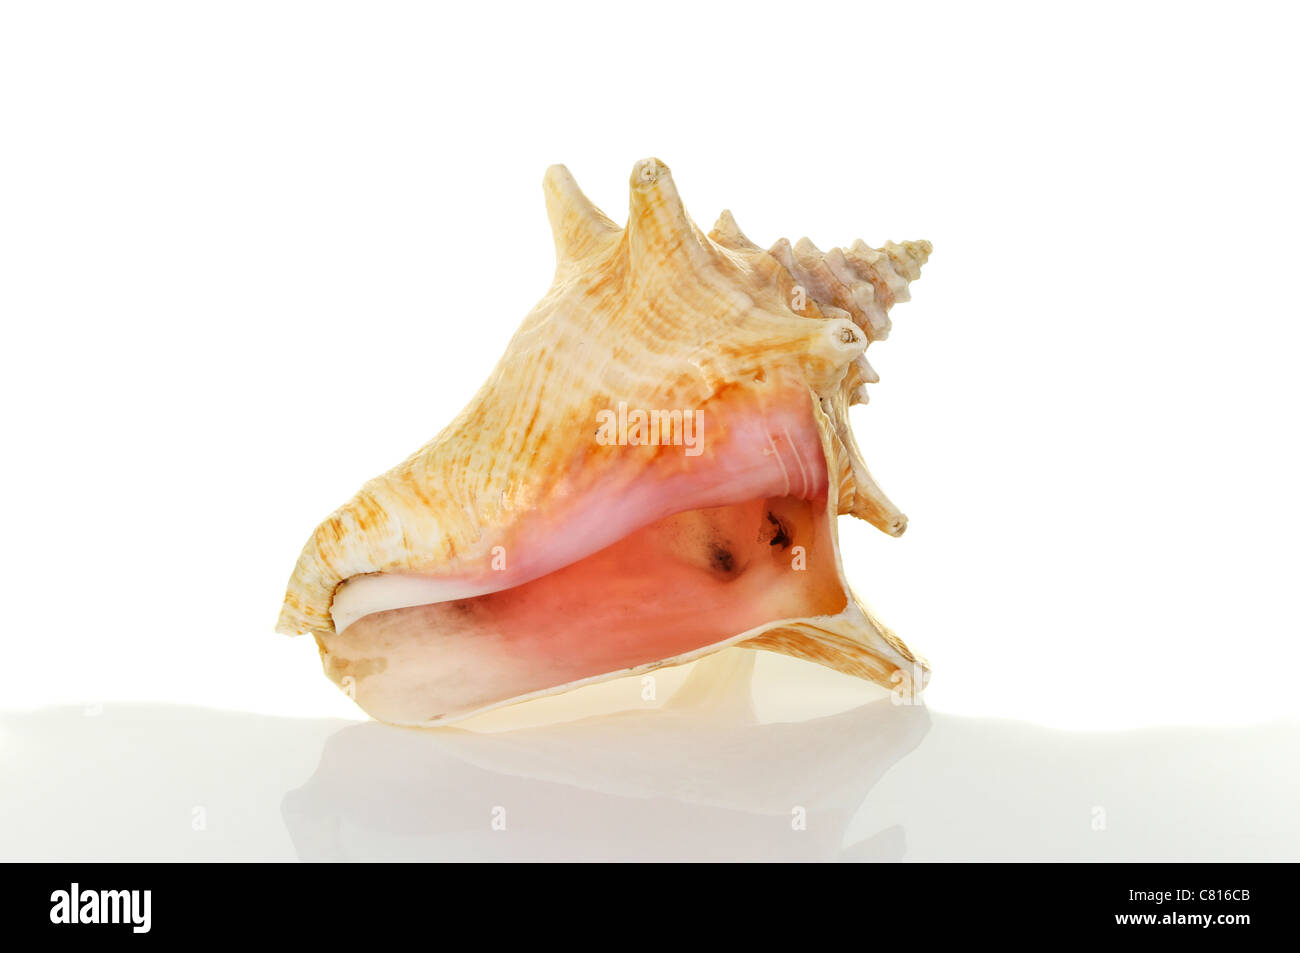 Conch sea snail shell with a soft reflection and shadow against a white background Stock Photo